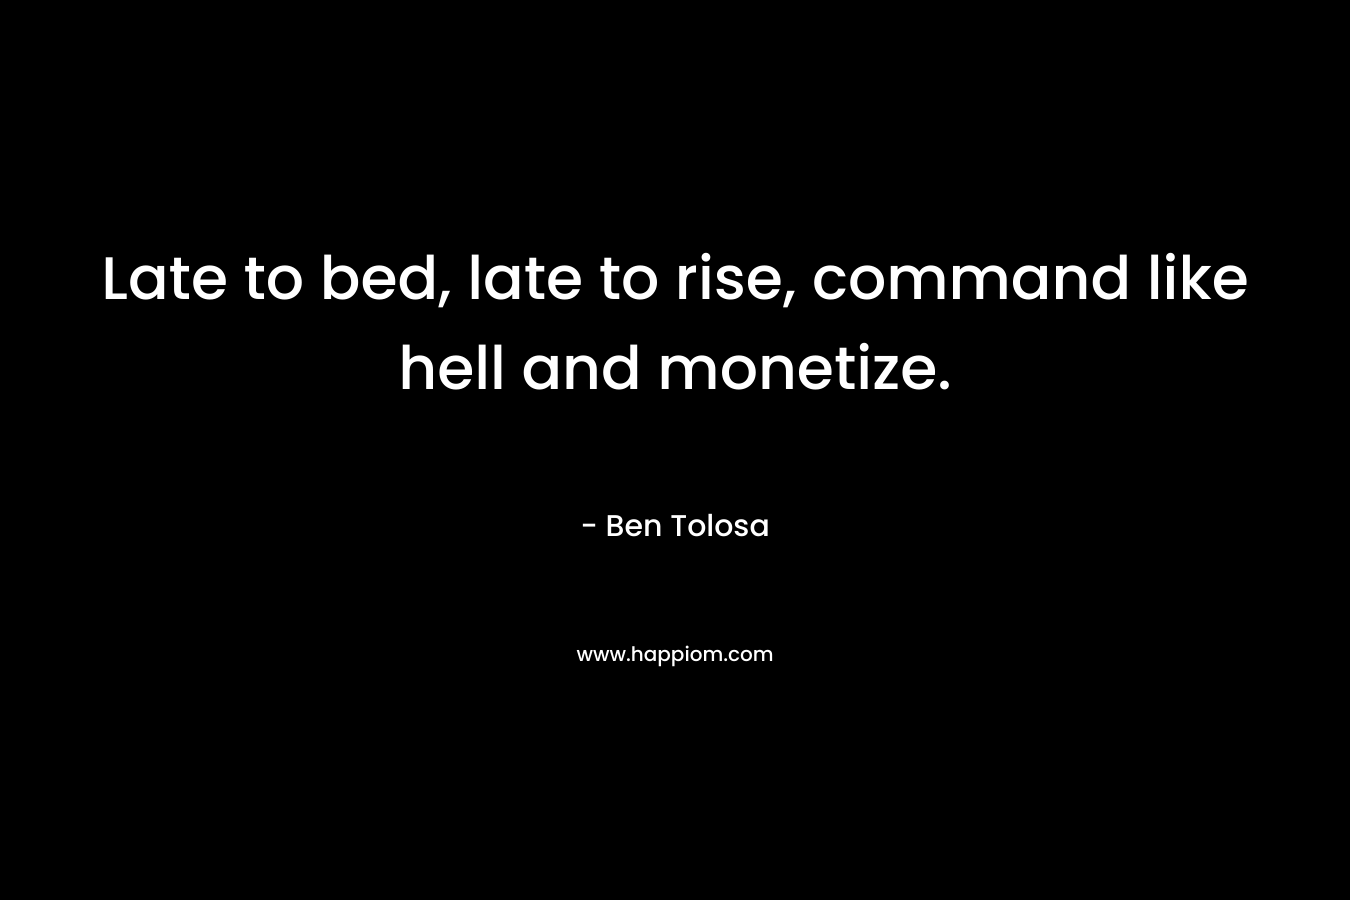 Late to bed, late to rise, command like hell and monetize.